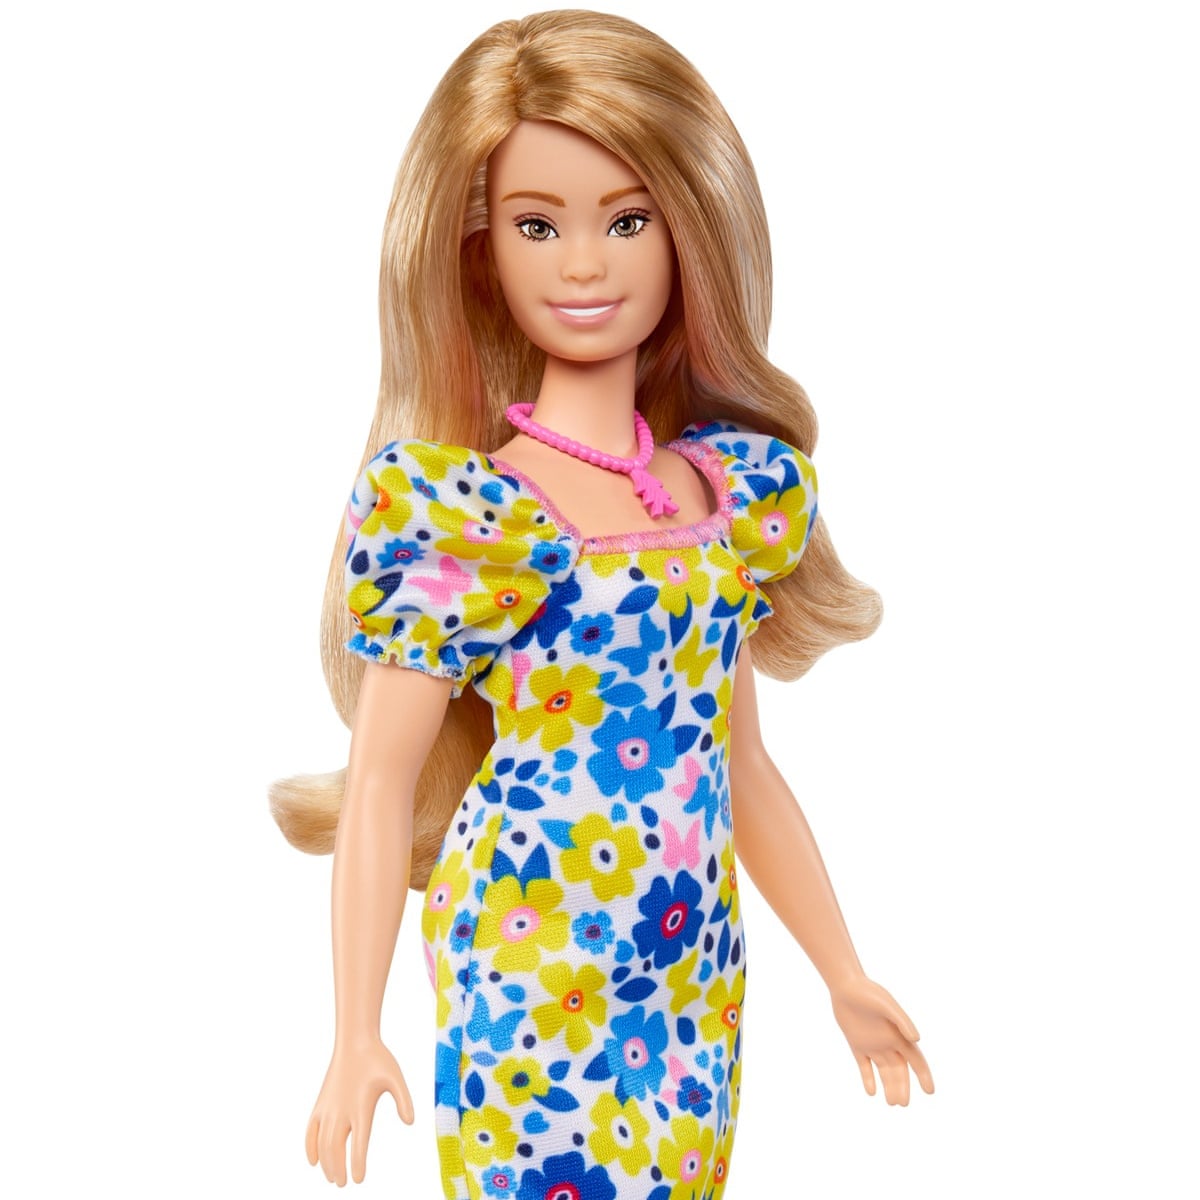 Barbie doll with Down's syndrome launched by Mattel | Down's ...